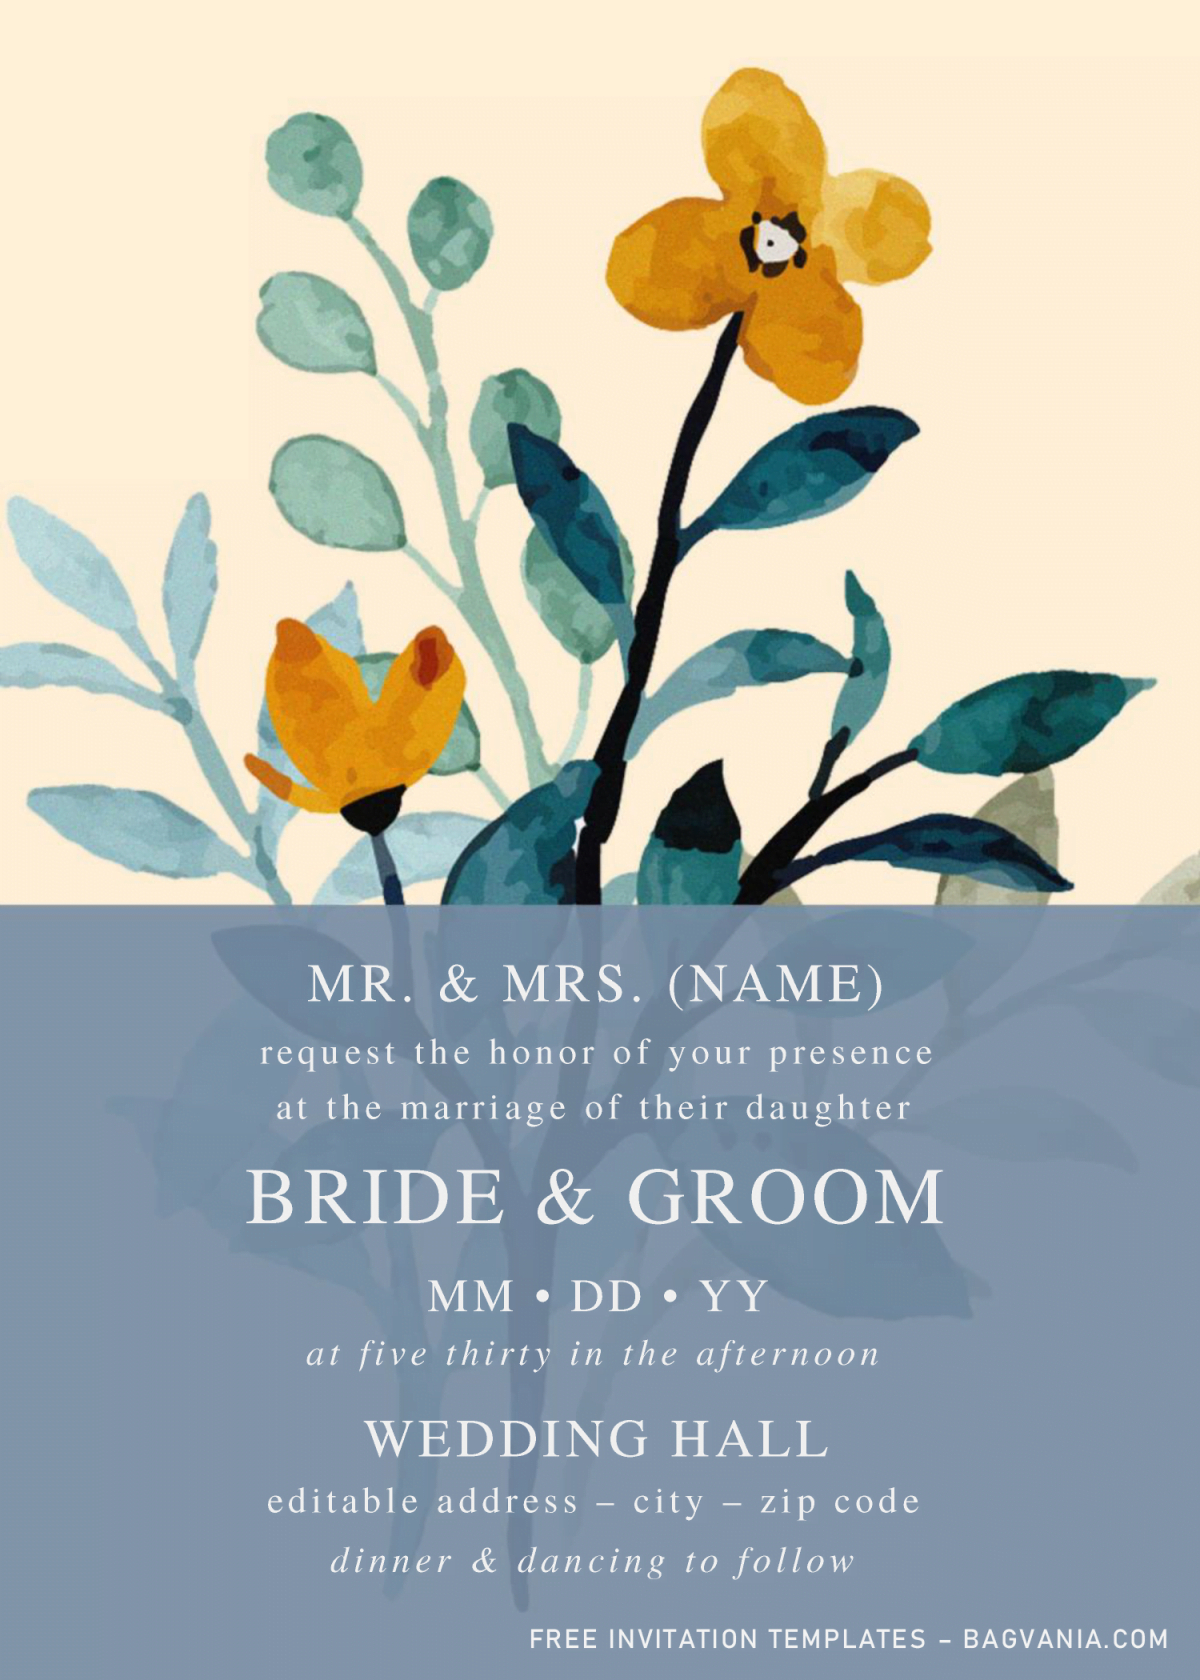 Romantic Spring Invitation Templates - Editable .Docx and has modern style